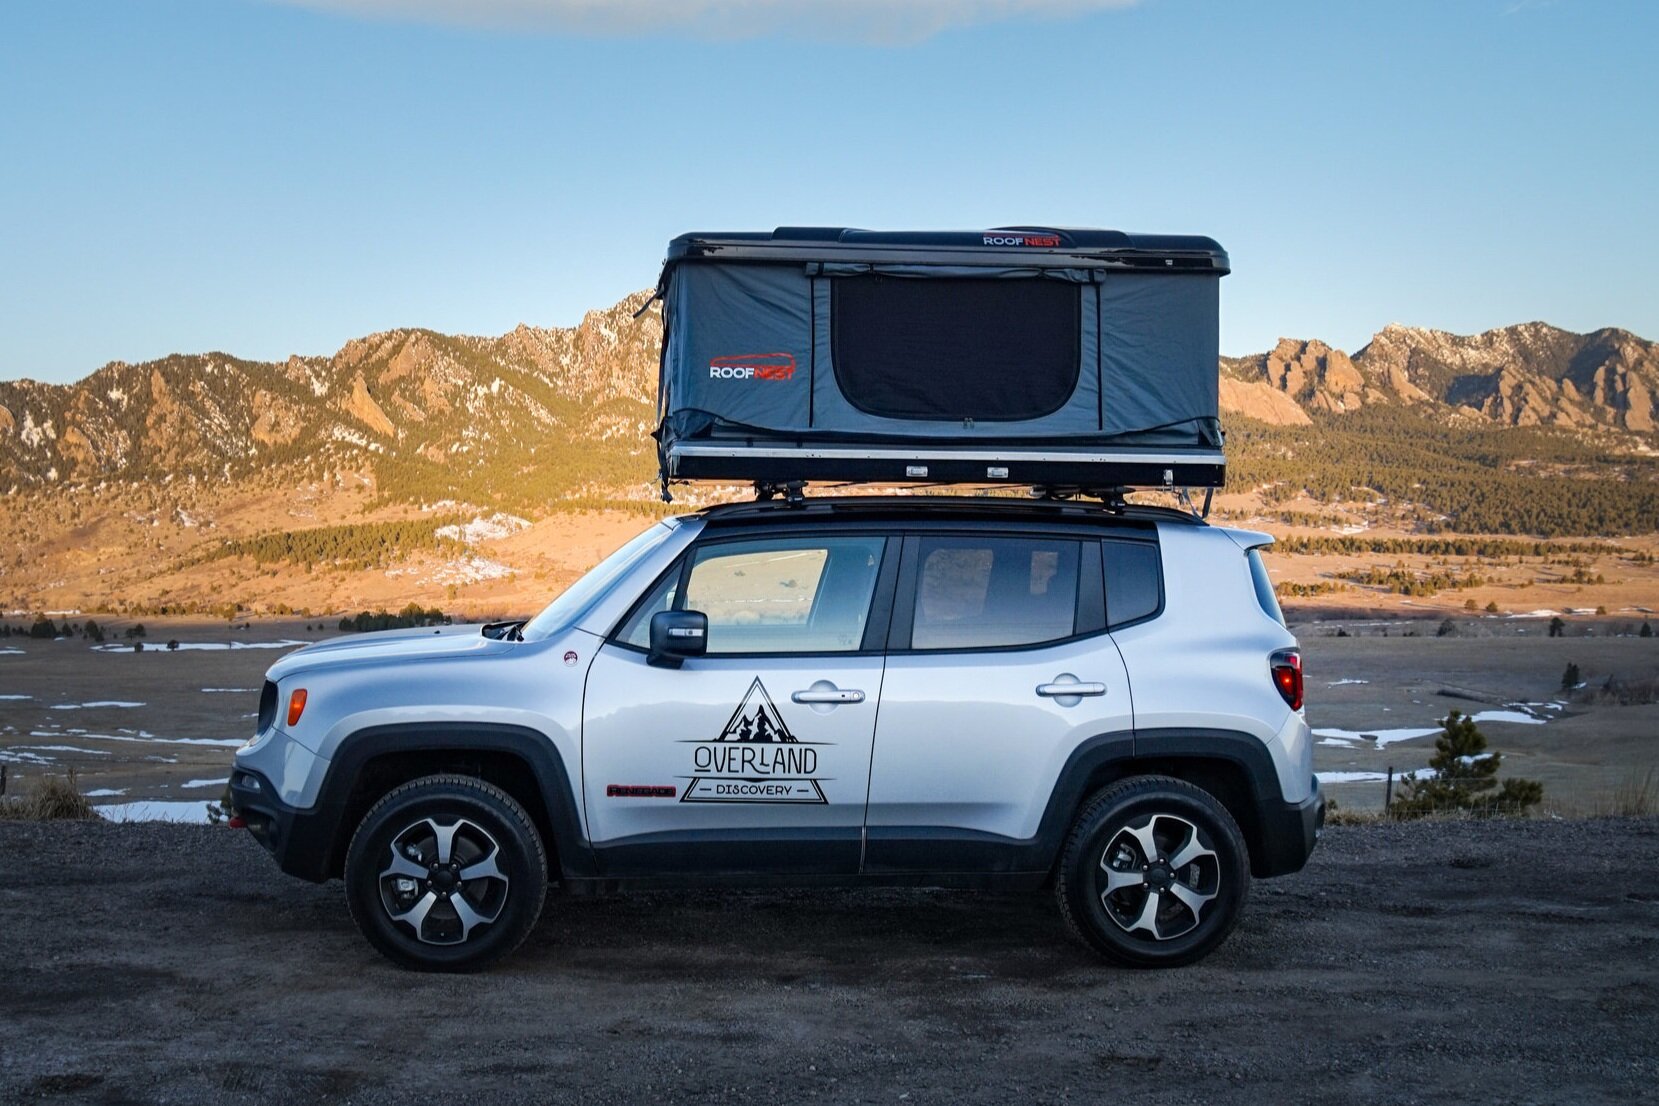  Jeep  Camper Rental Overview Overland Discovery 